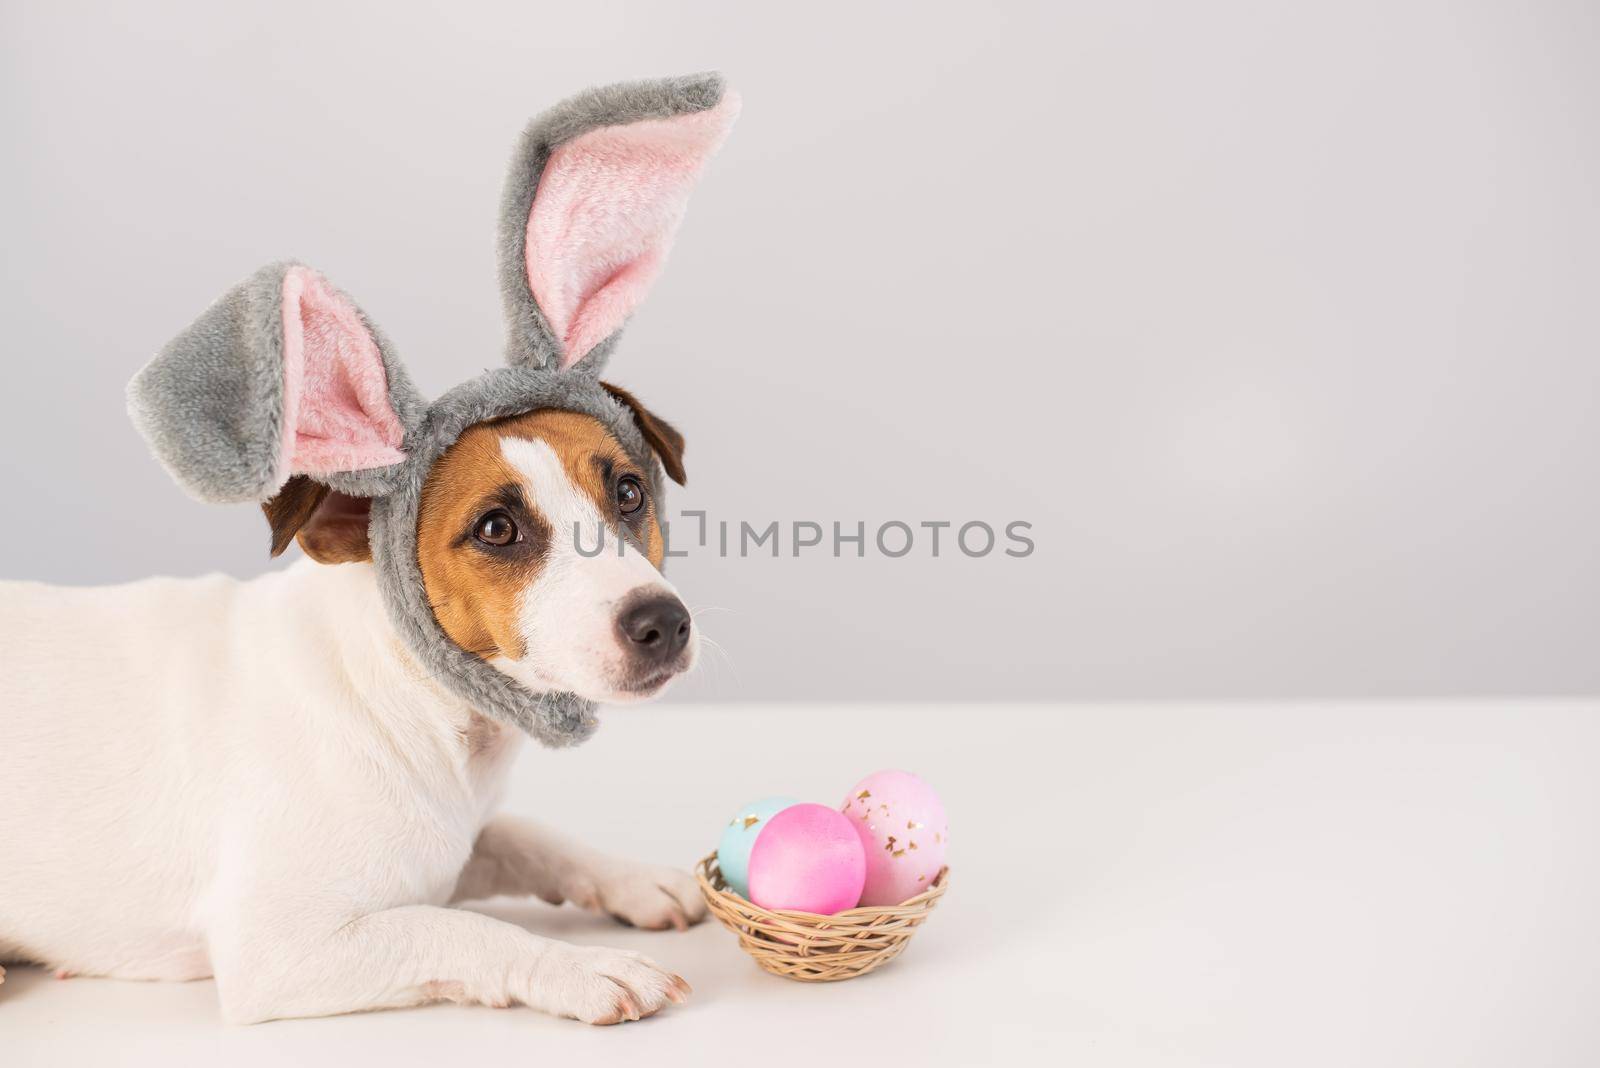 Funny dog Jack Russell Terrier in a bunny costume with a basket of painted eggs on a white background. Catholic Easter symbol by mrwed54